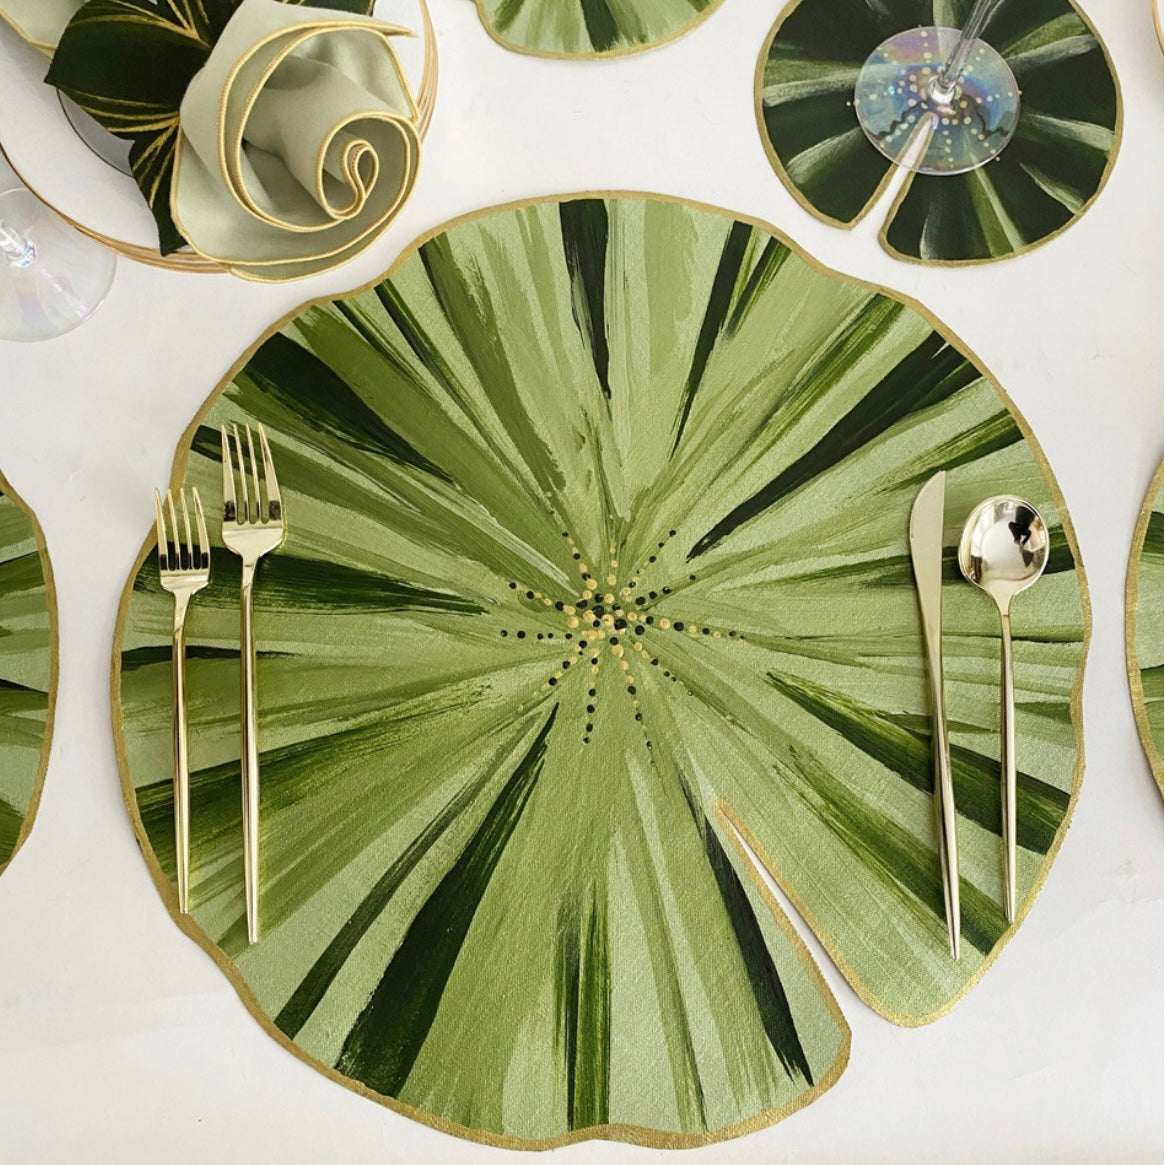 Generous Lily Pad Placemat